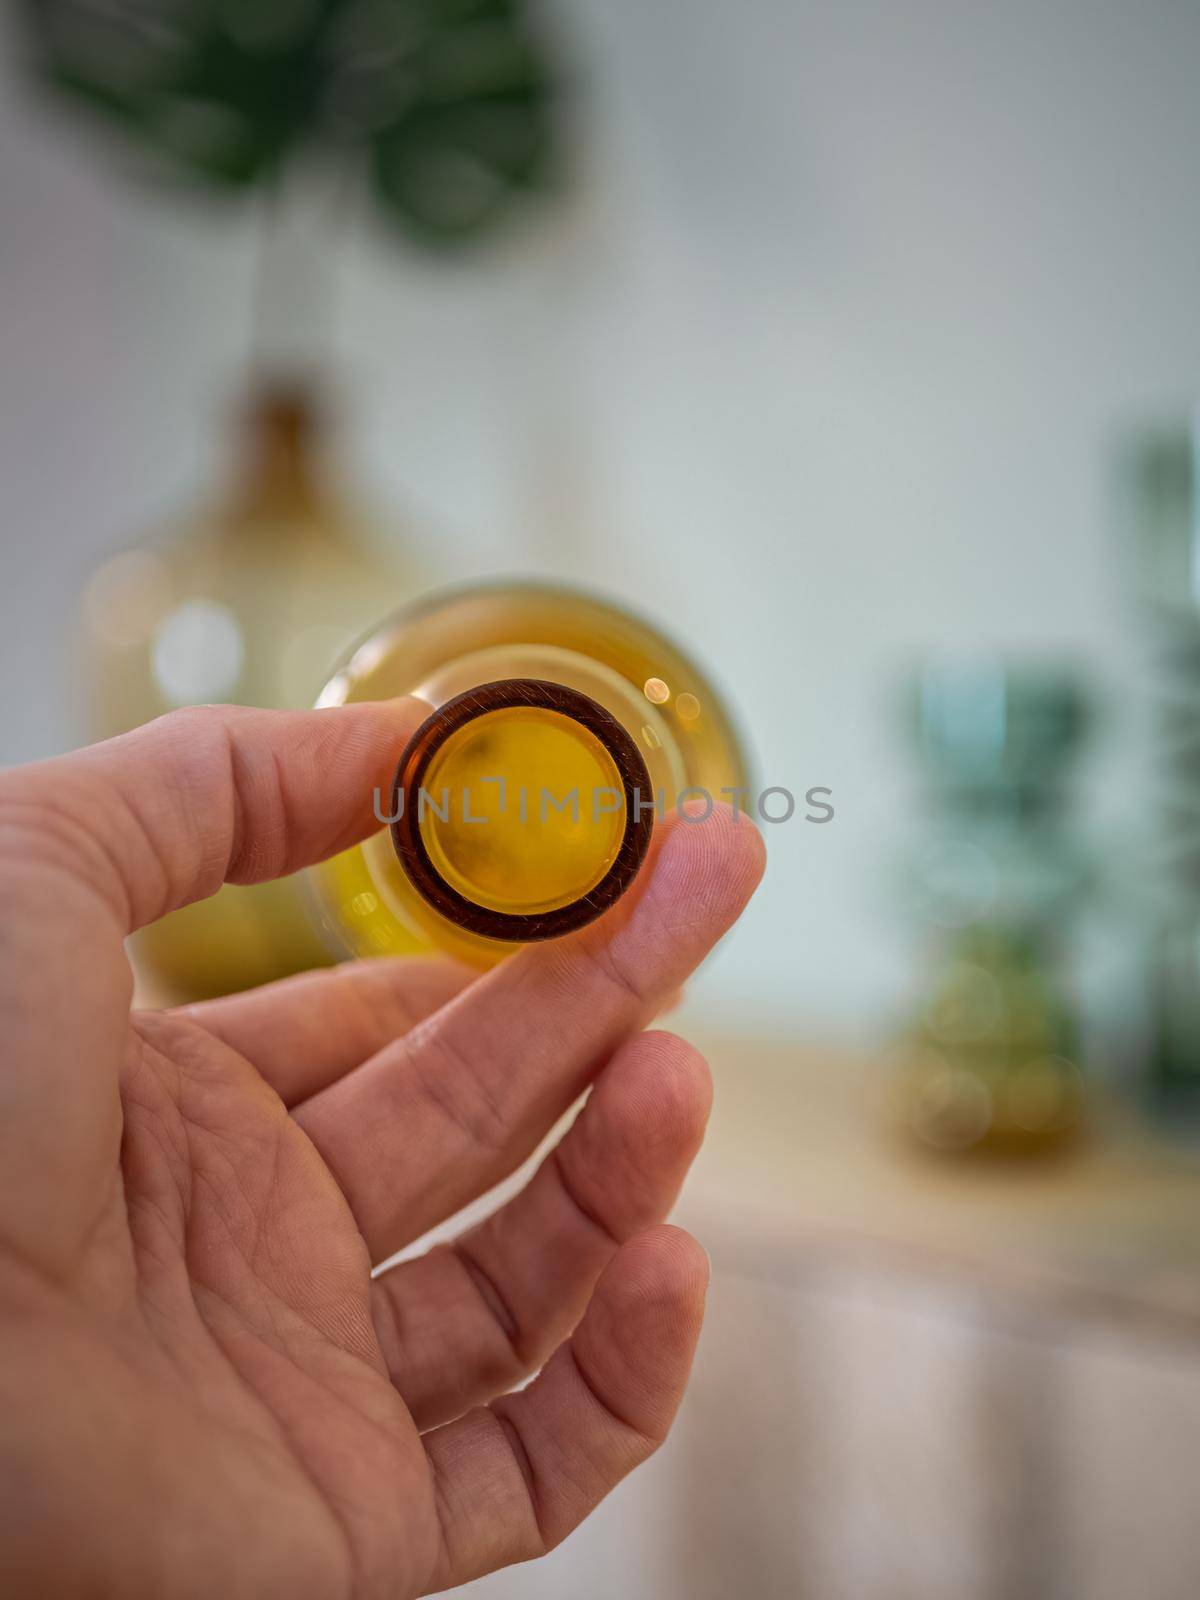 Men's hand holding a transparent yellow bottle with blurred background in interior